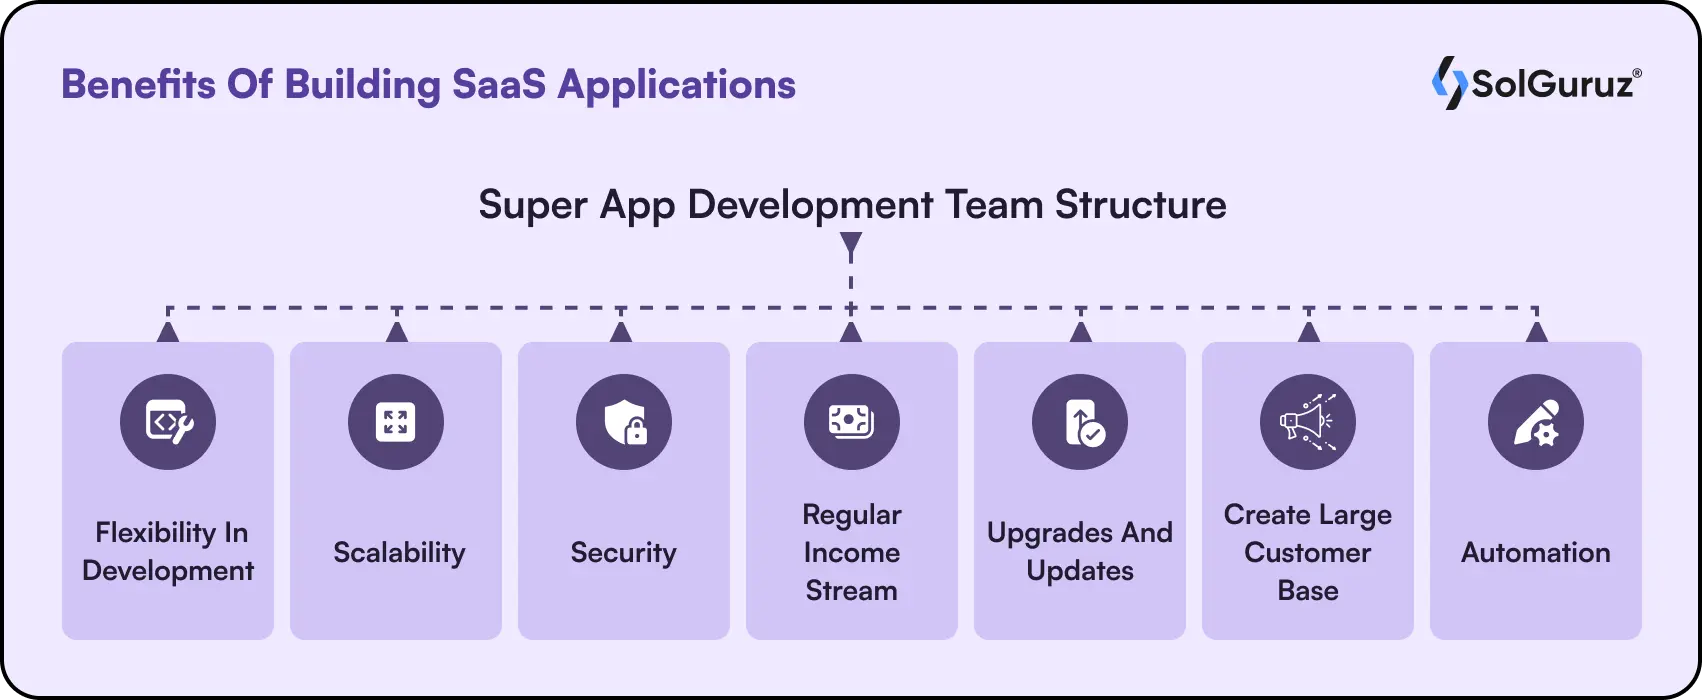 Benefits Of Building SaaS Applications